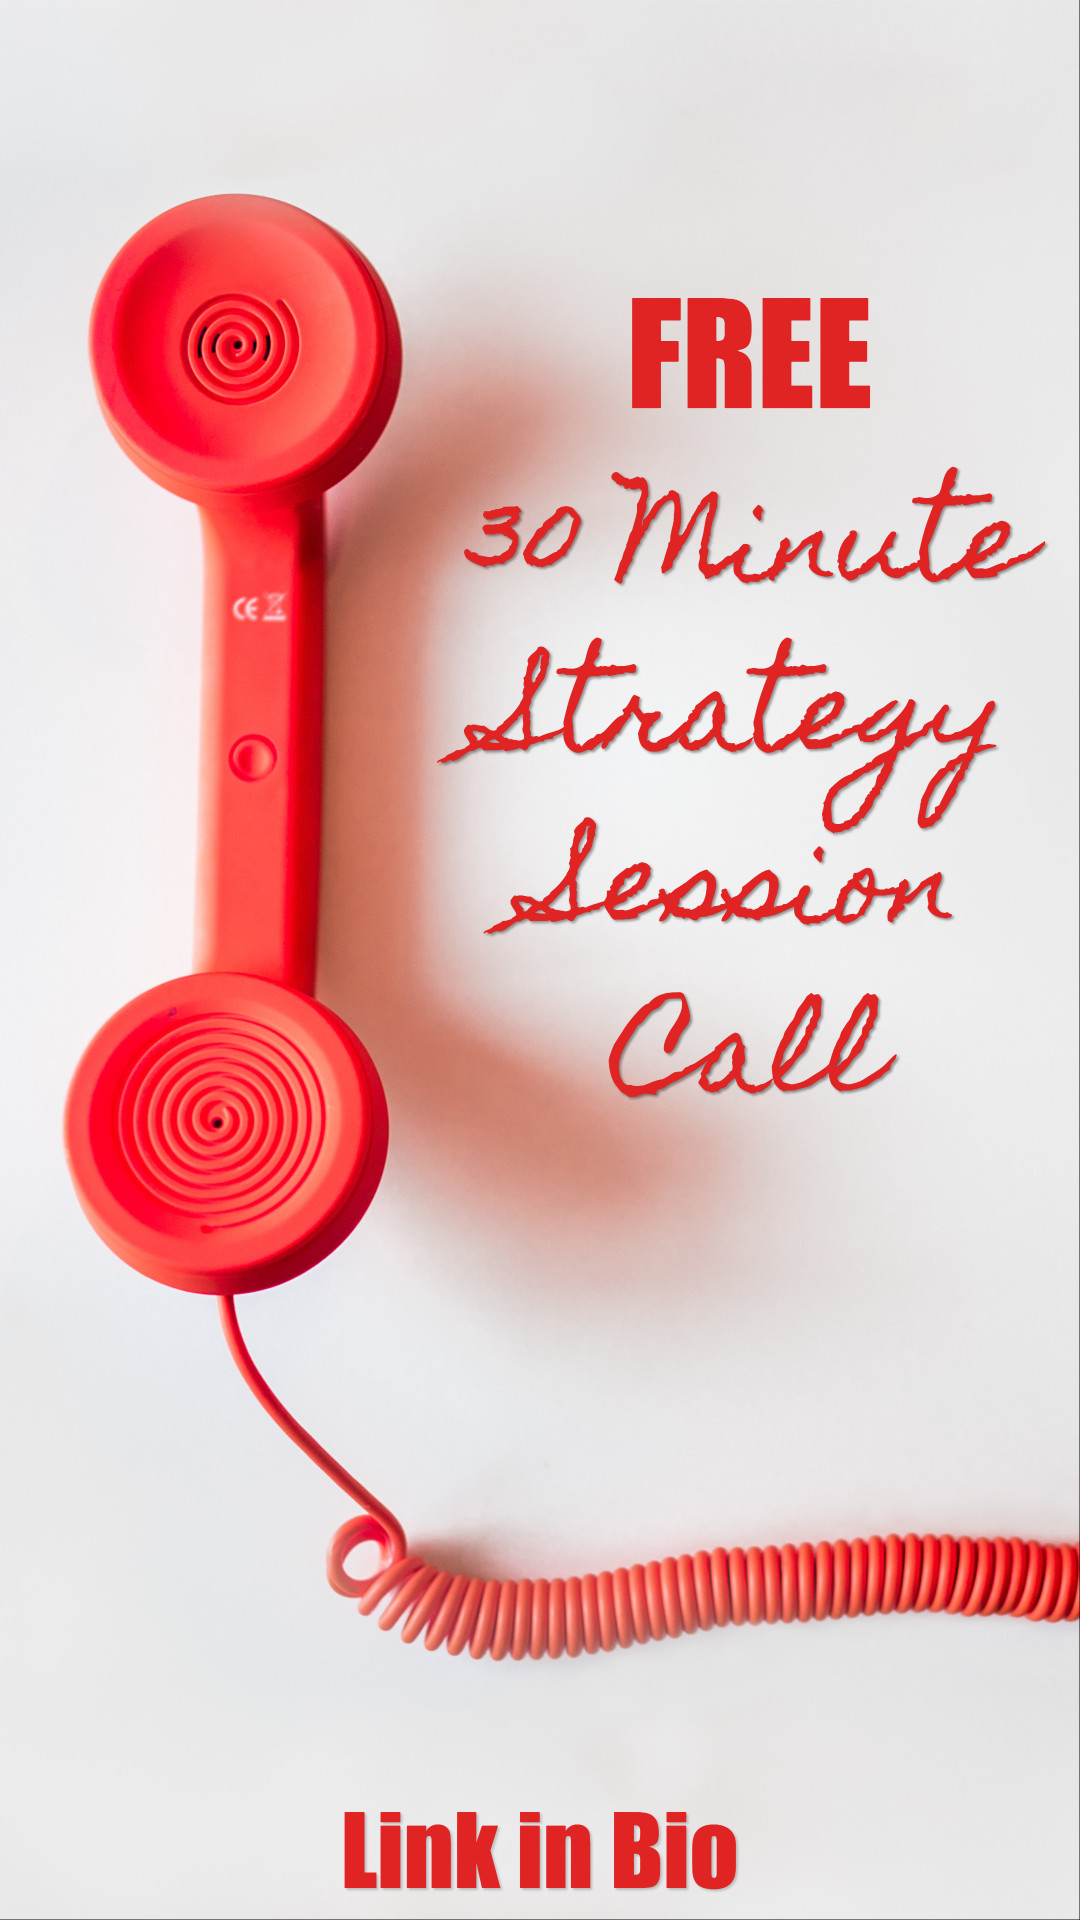 Free 30 minute strategy session call